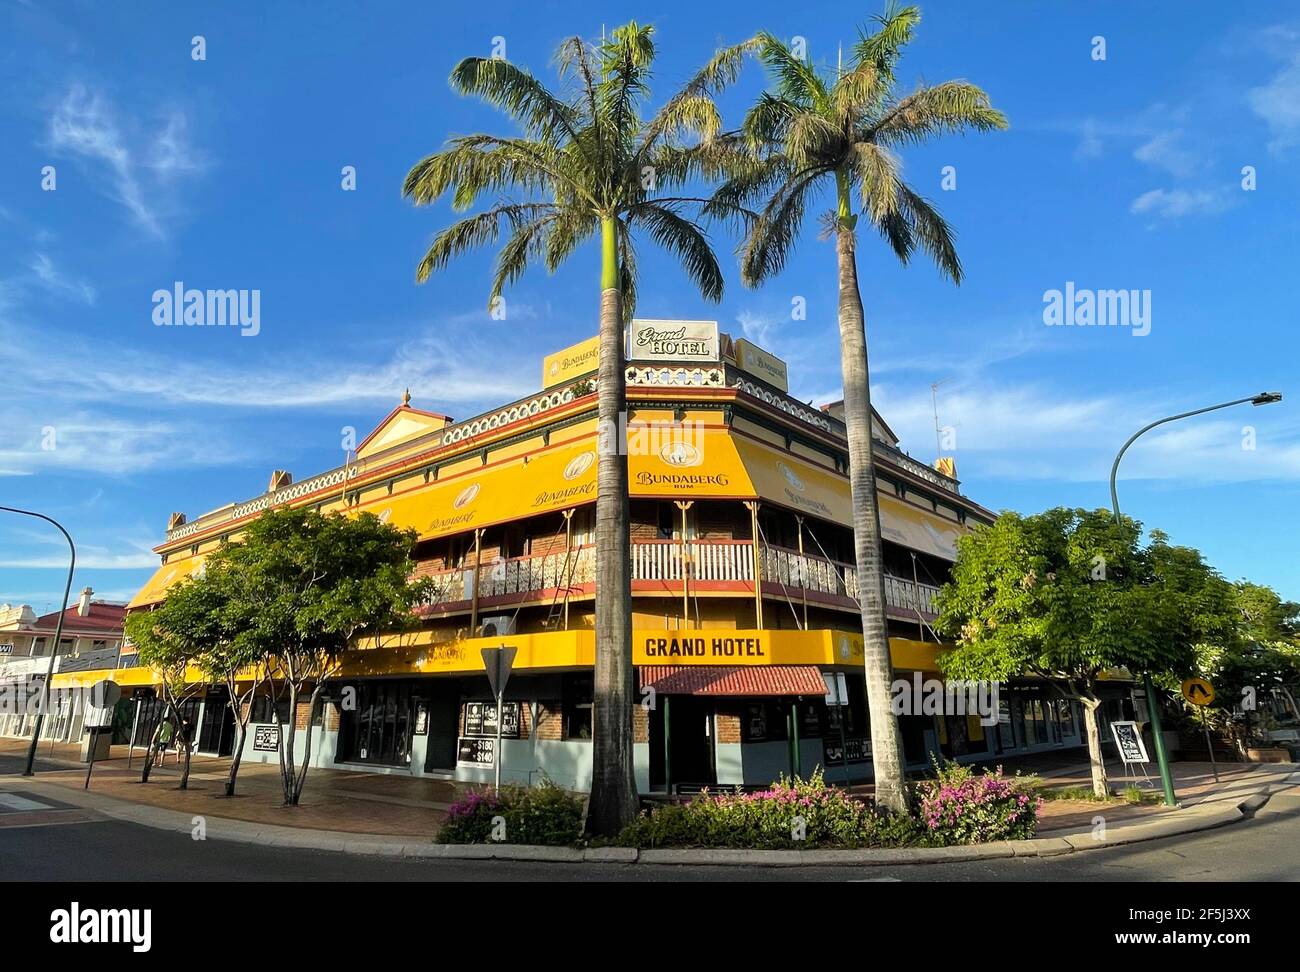 Facade of the Grand Budaberg Hotel, built in early 20th century in central town of Bundaberg, Queensland, Australia Stock Photo